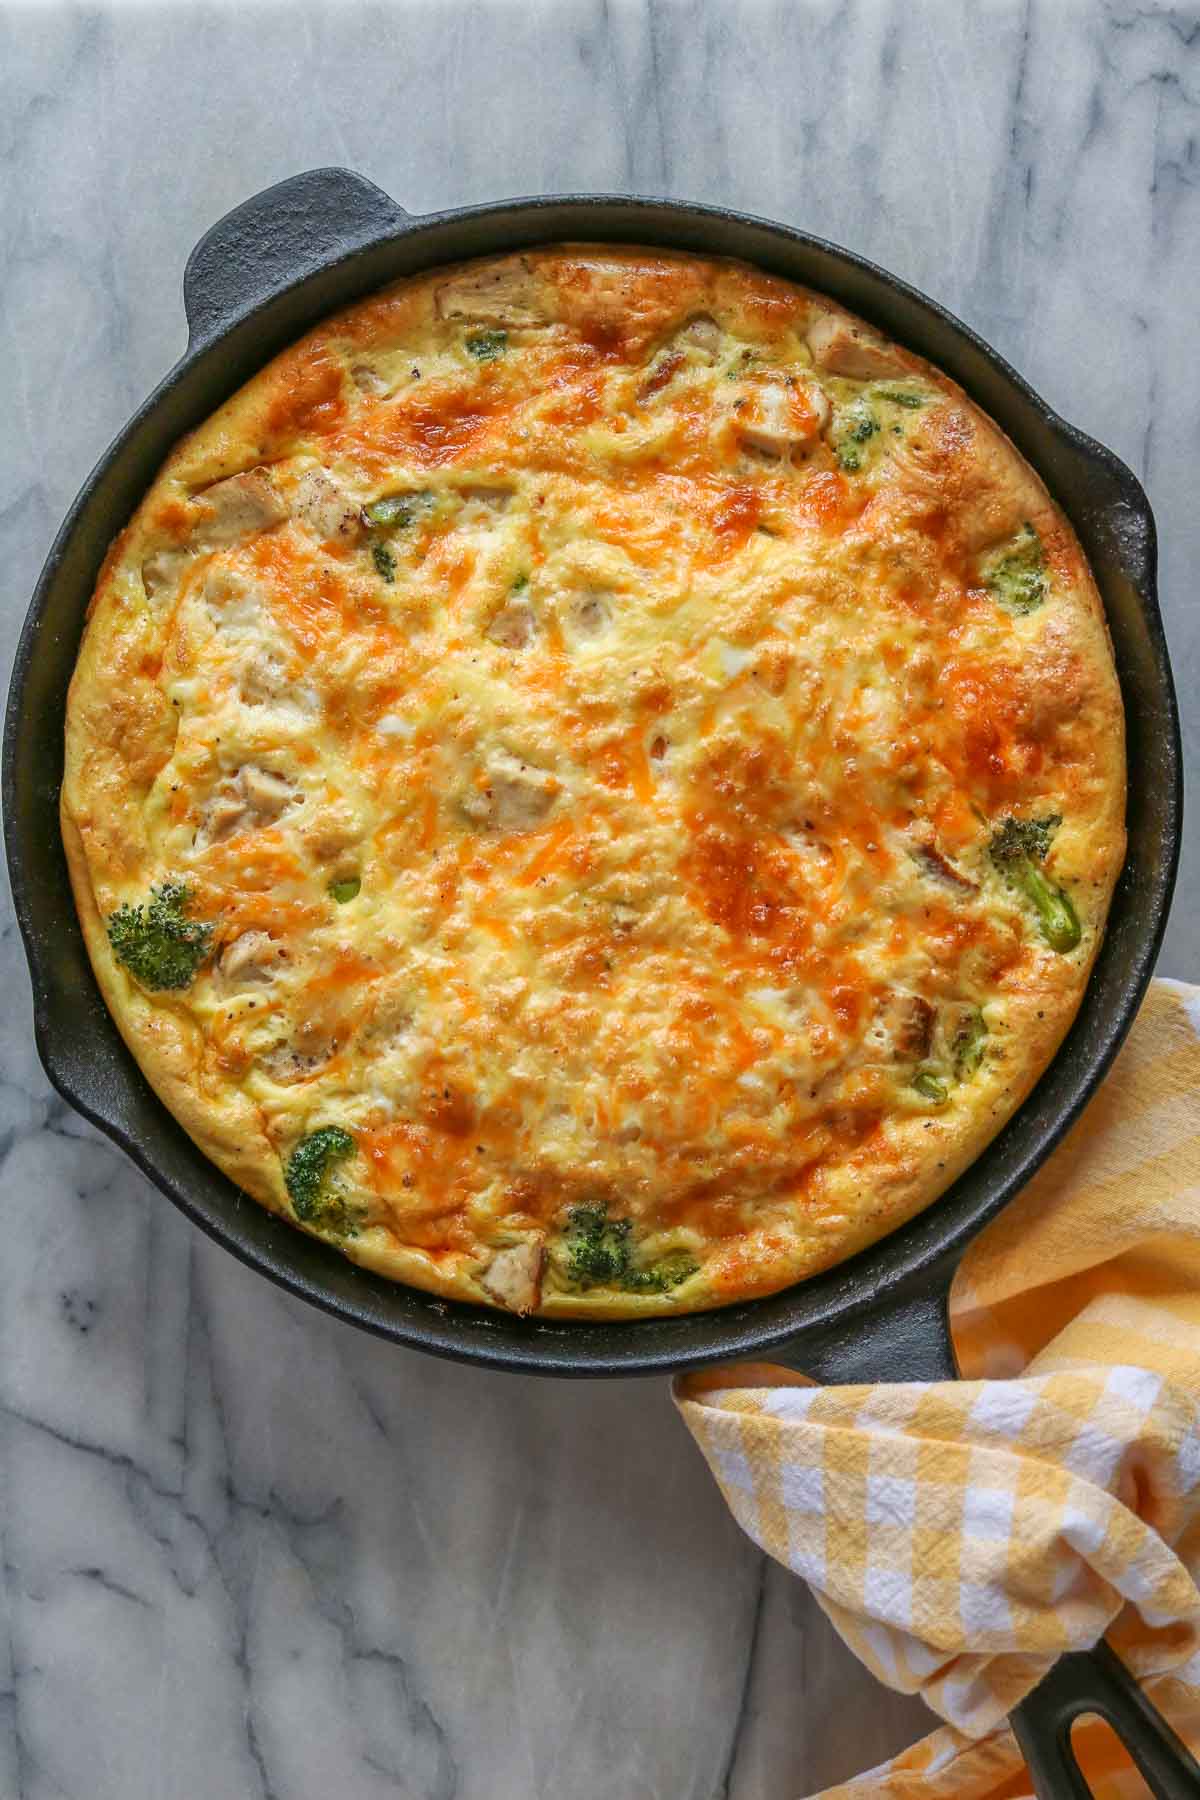 Baked broccoli and chicken frittata in a skillet.